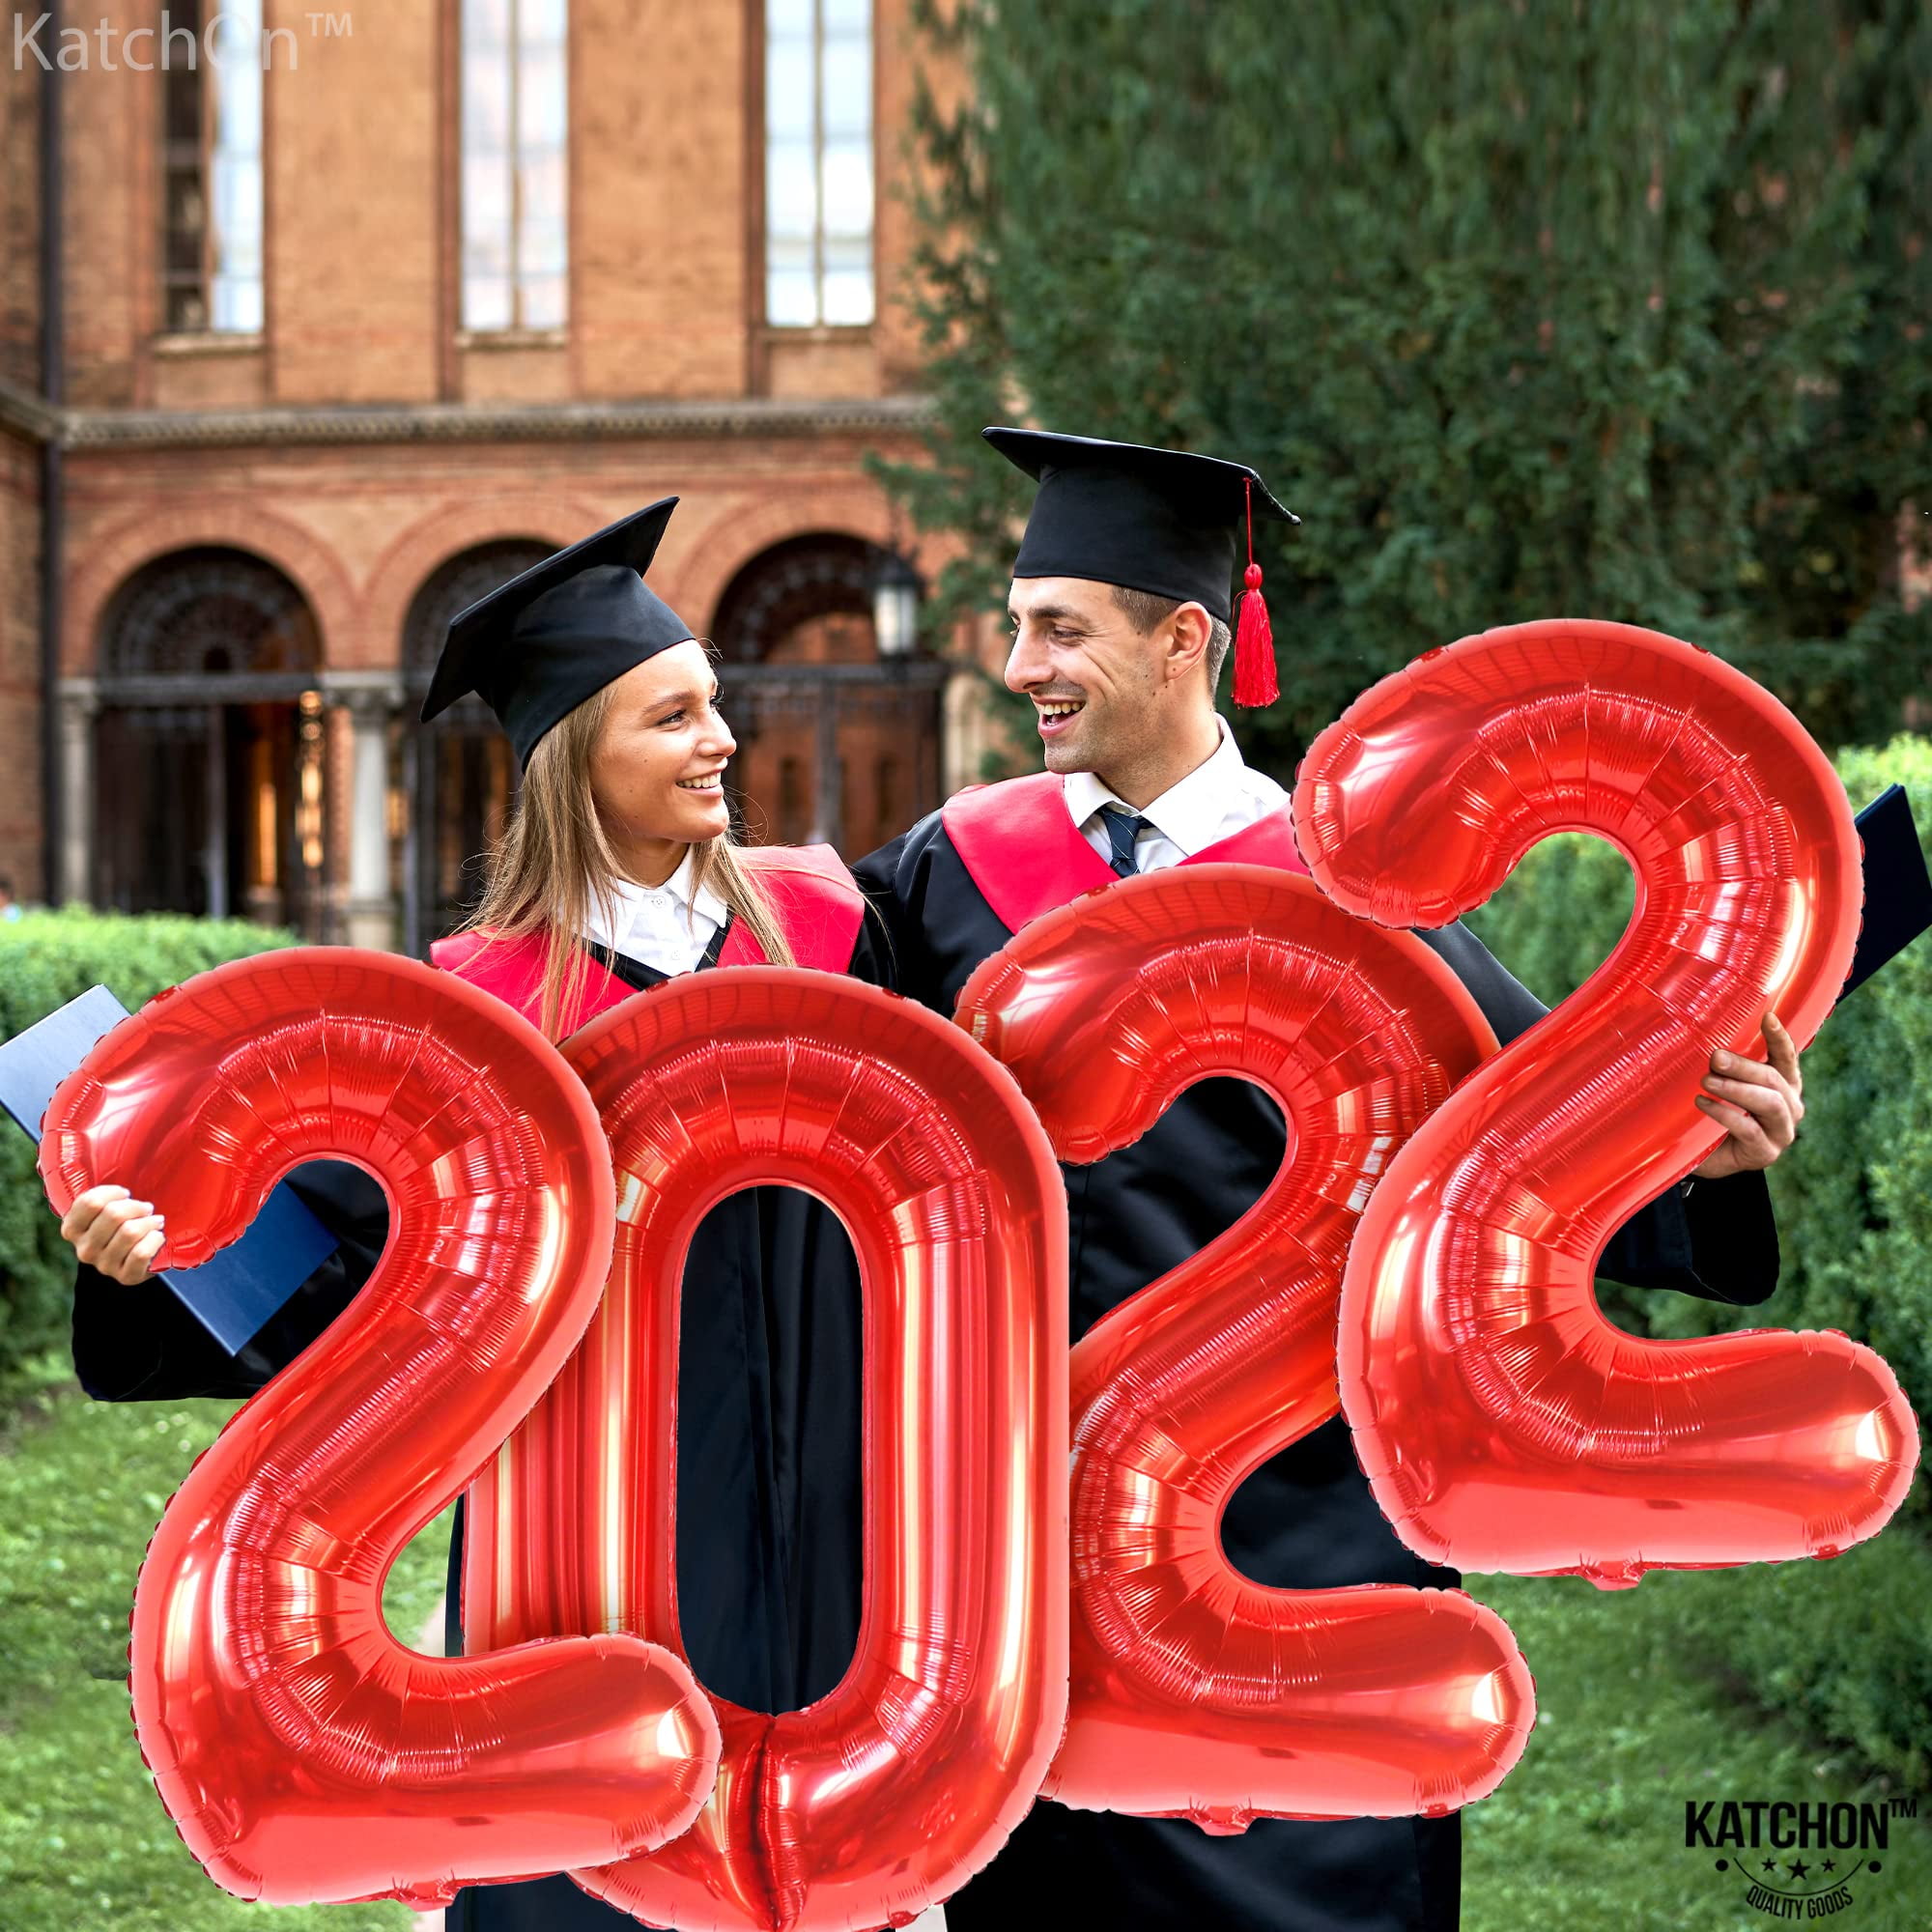 6 pcs/set Class of 2024 Graduation Decorations with2 Couplets, 1 Number  2022 Silver Balloon Perfect for College, High School, Nursing, Doctorate